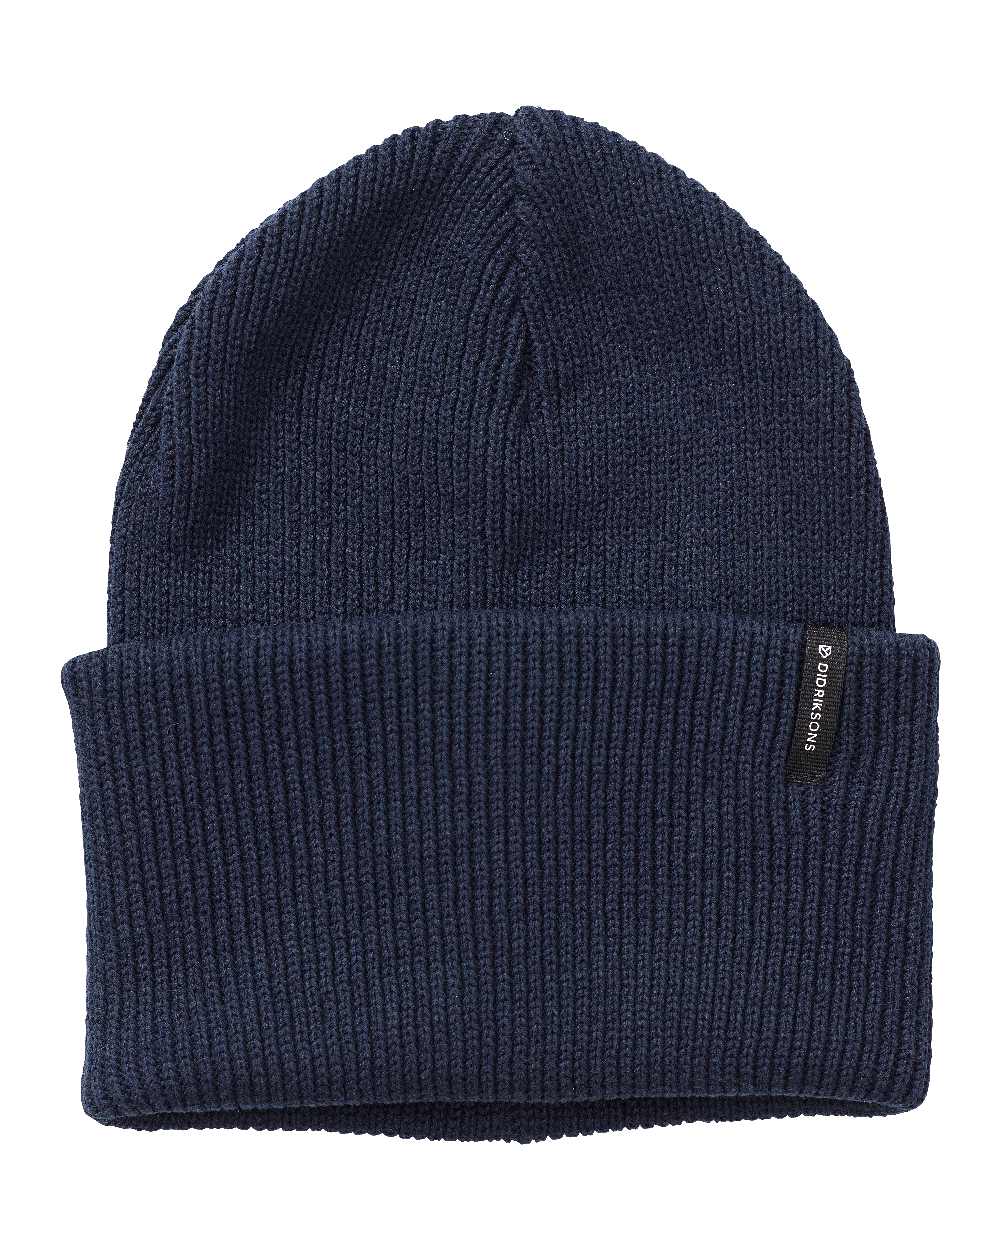 Didriksons River Beanie 2 in Navy 